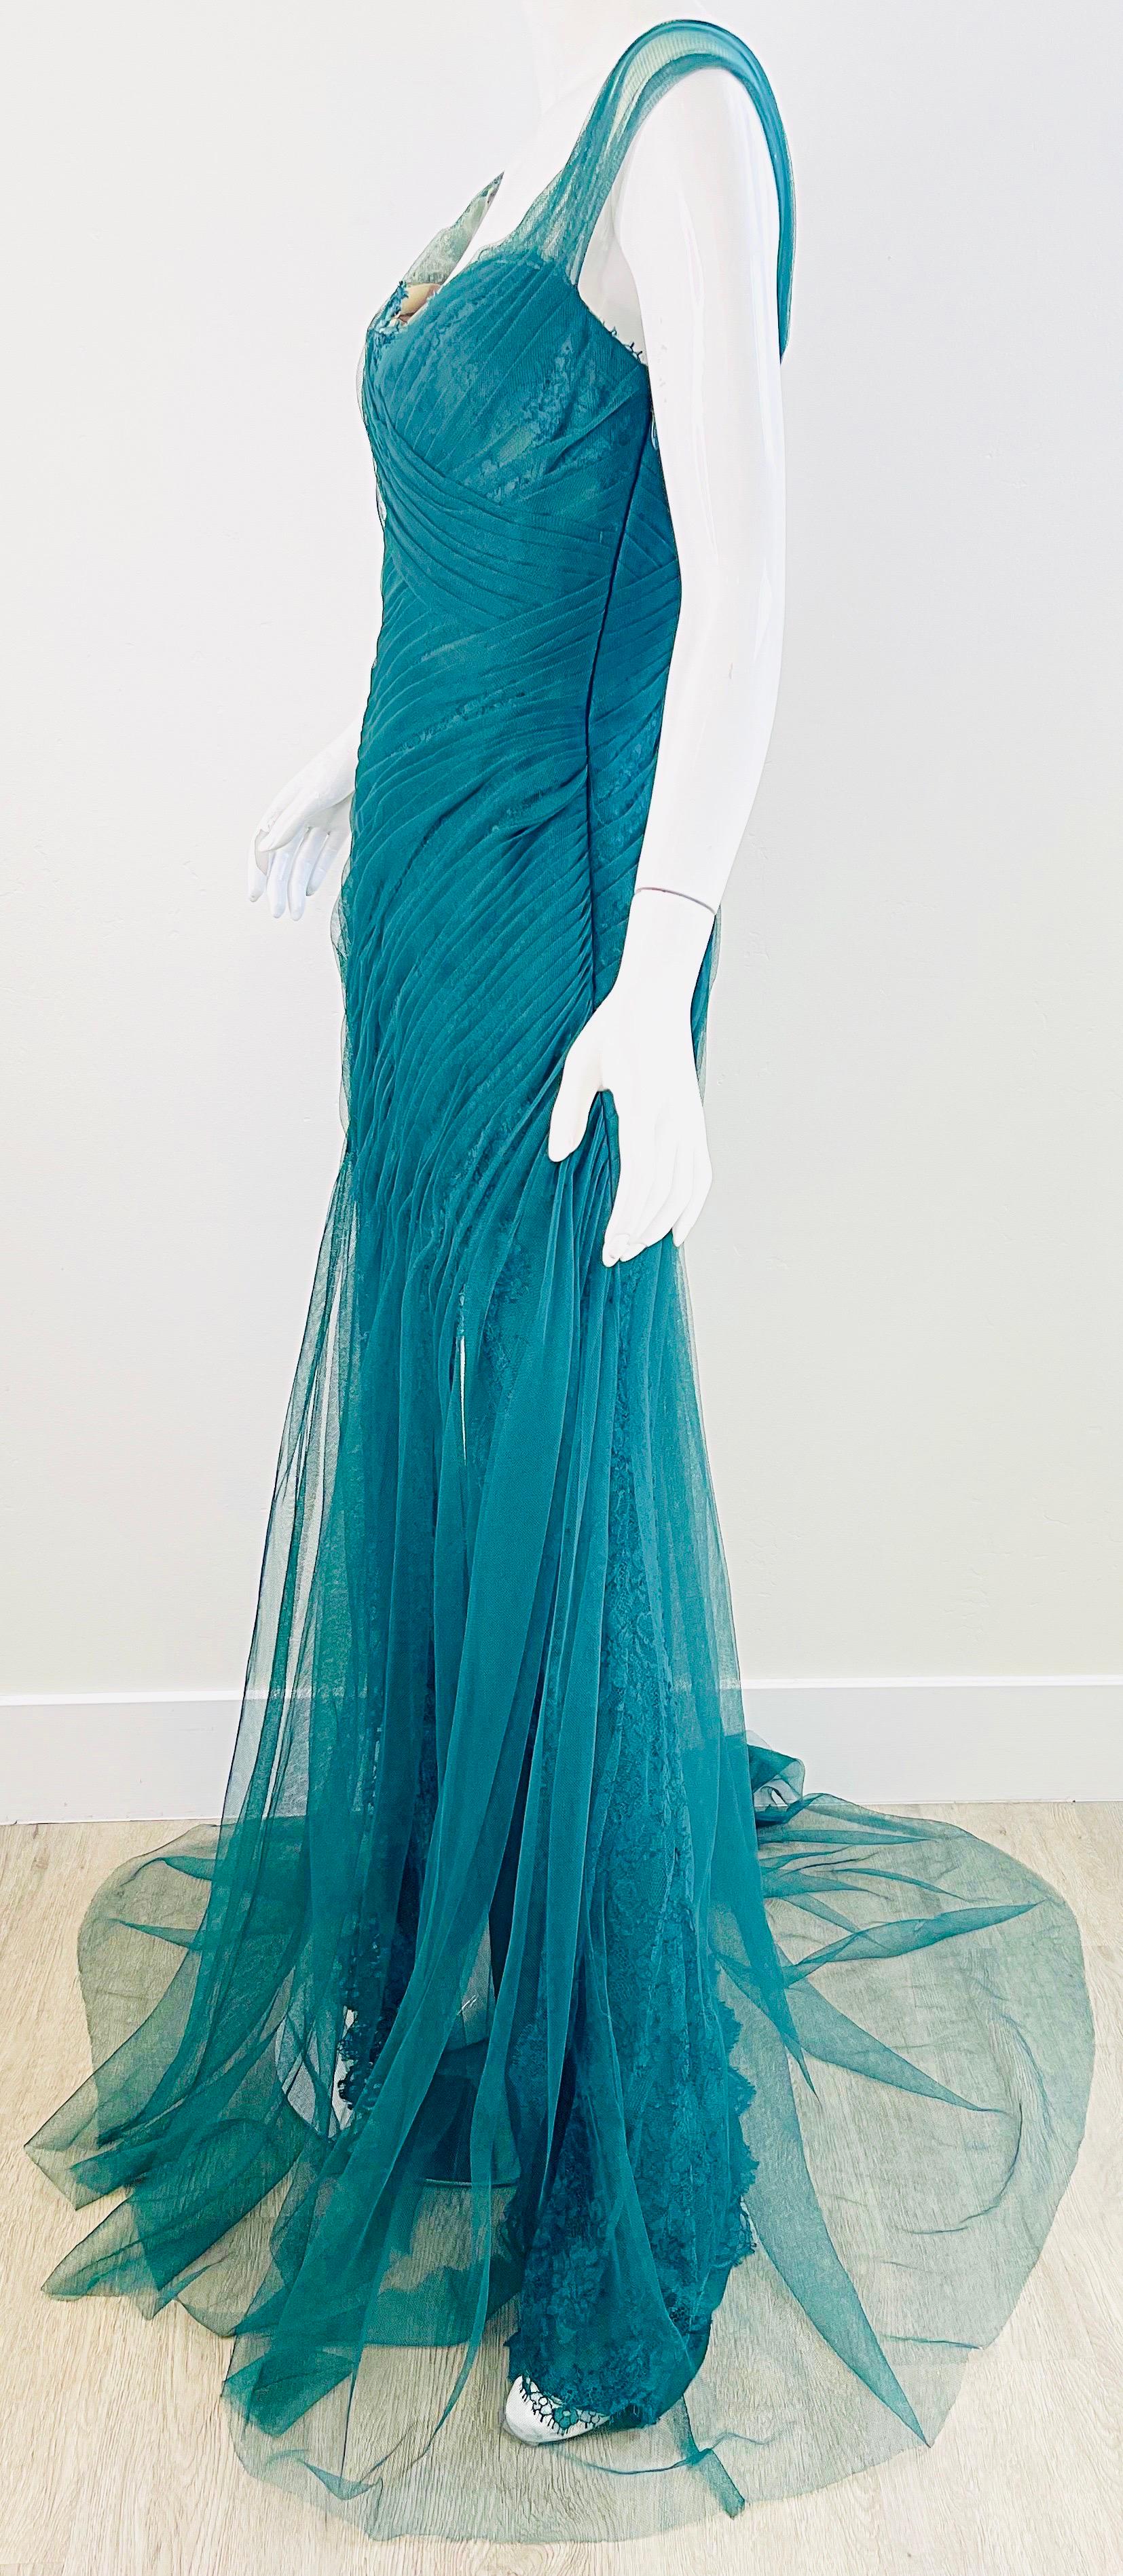 NWT Monique Lhuillier Runway Spring 2013 Size 4 Emerald Green Lace Gown Dress For Sale 11